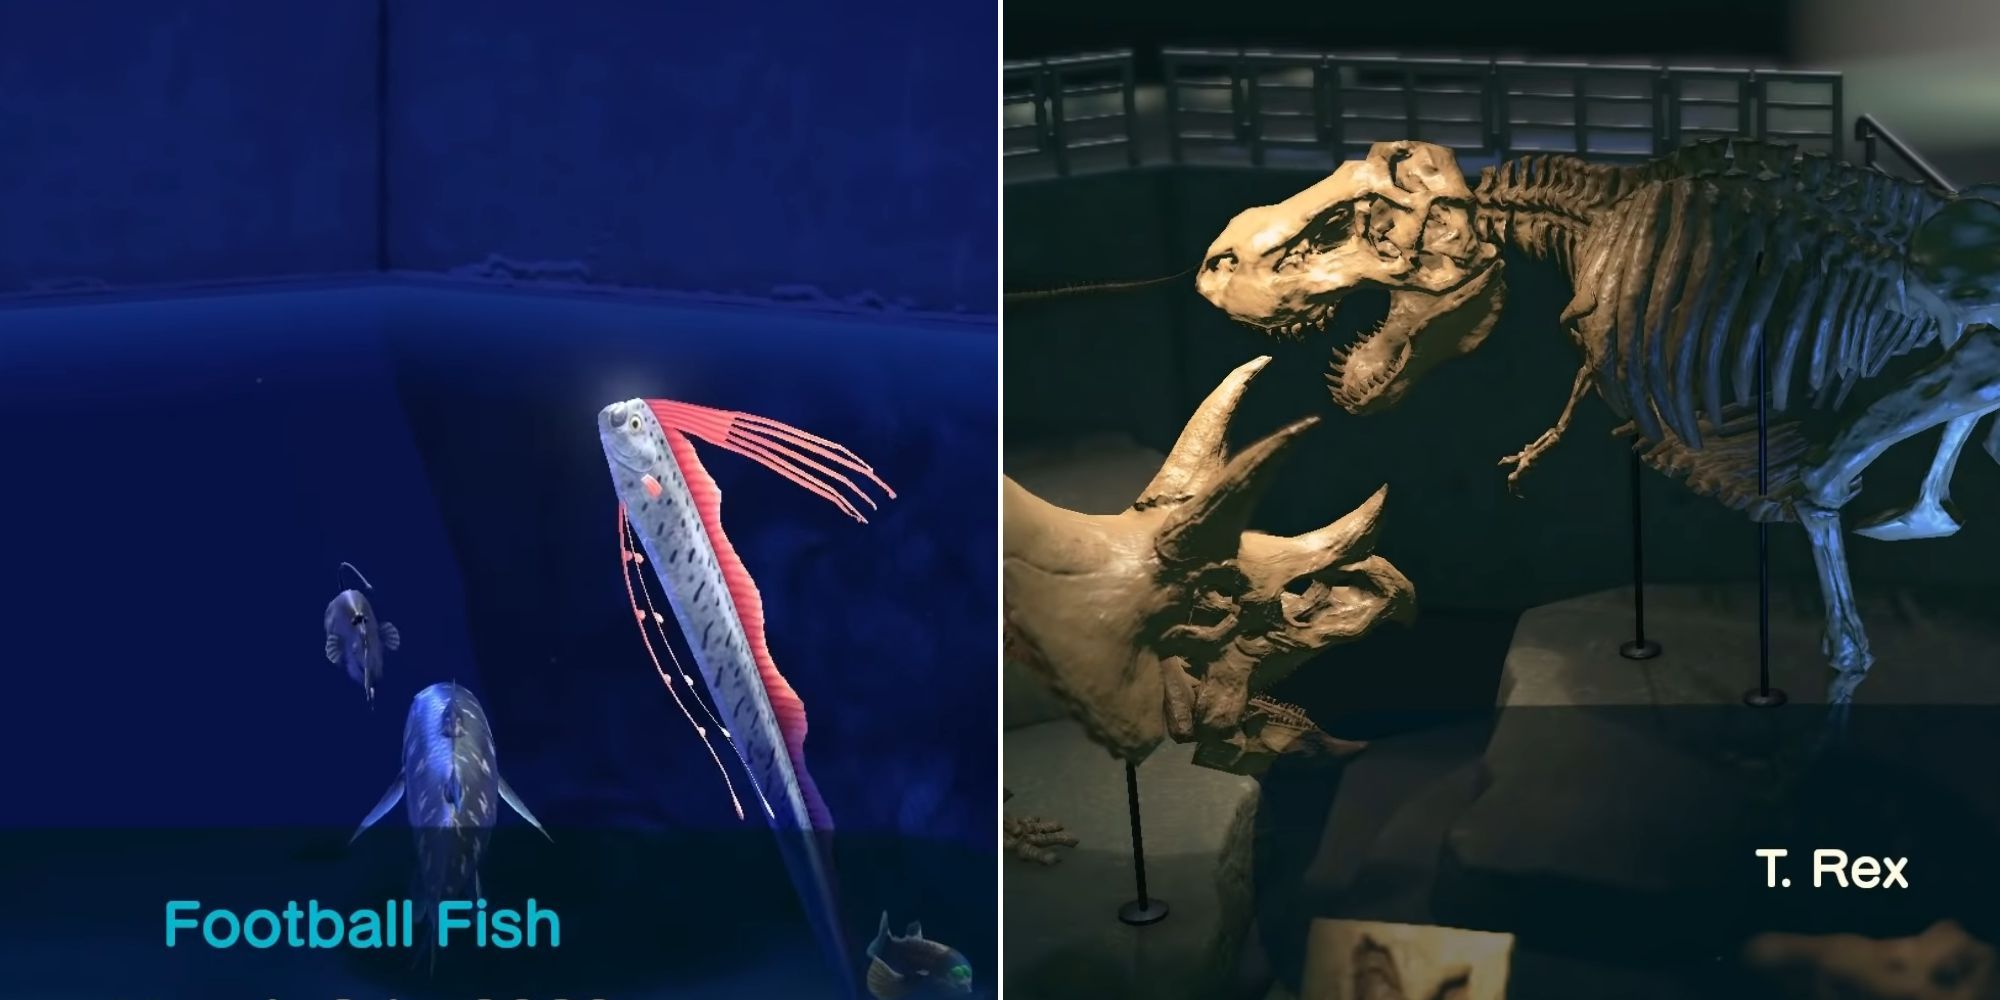 The Football Fish in the aquarium and T-rex bones on display in Animal Crossing: New Horizons